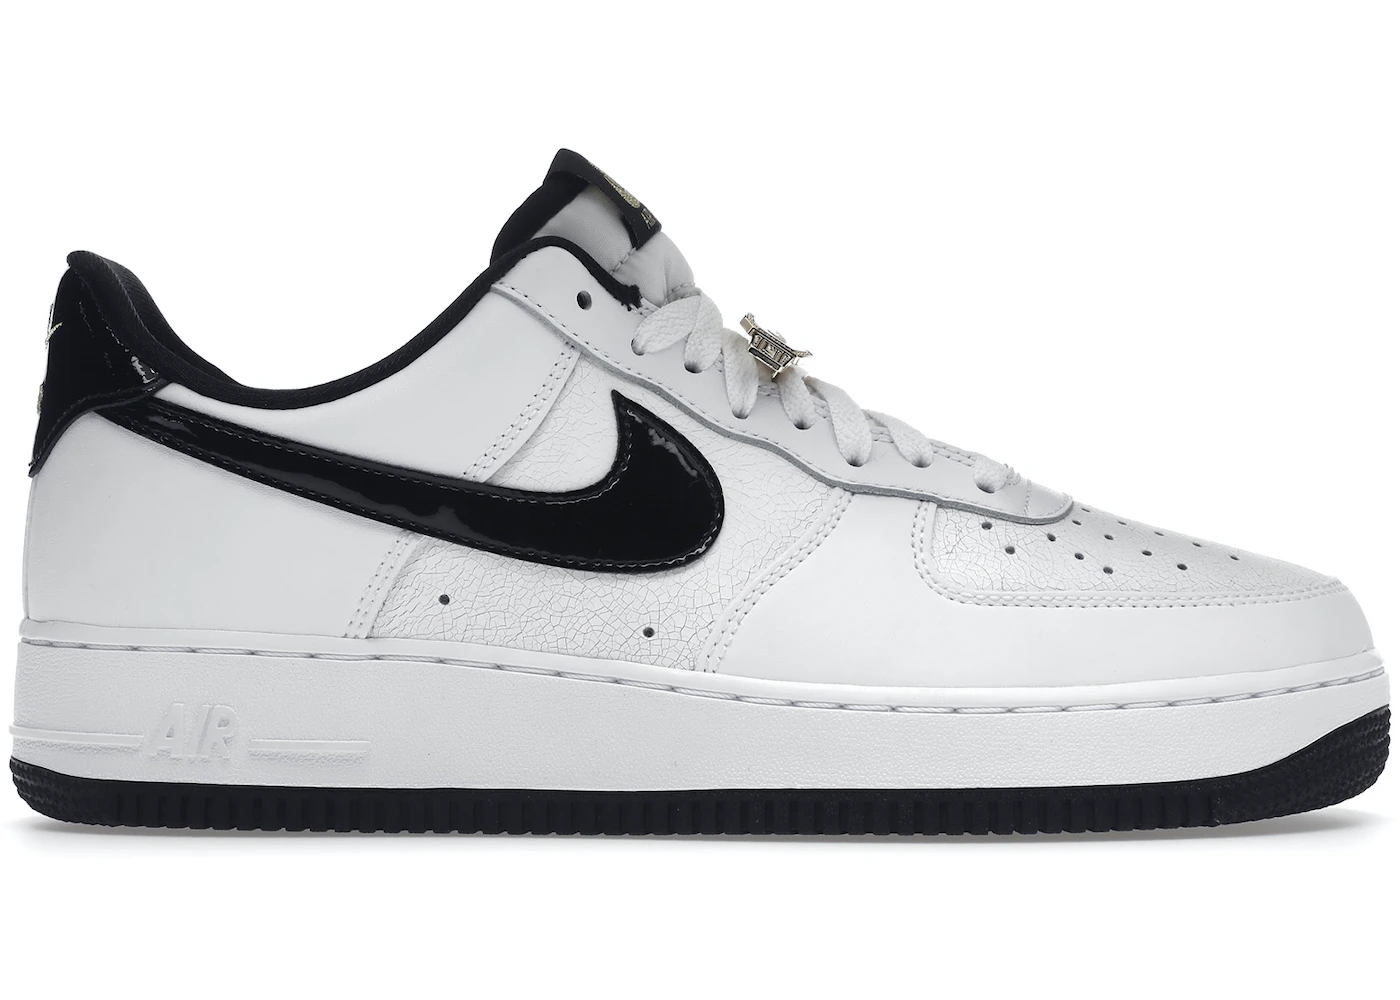 Nike air force 1 low , World cup pack